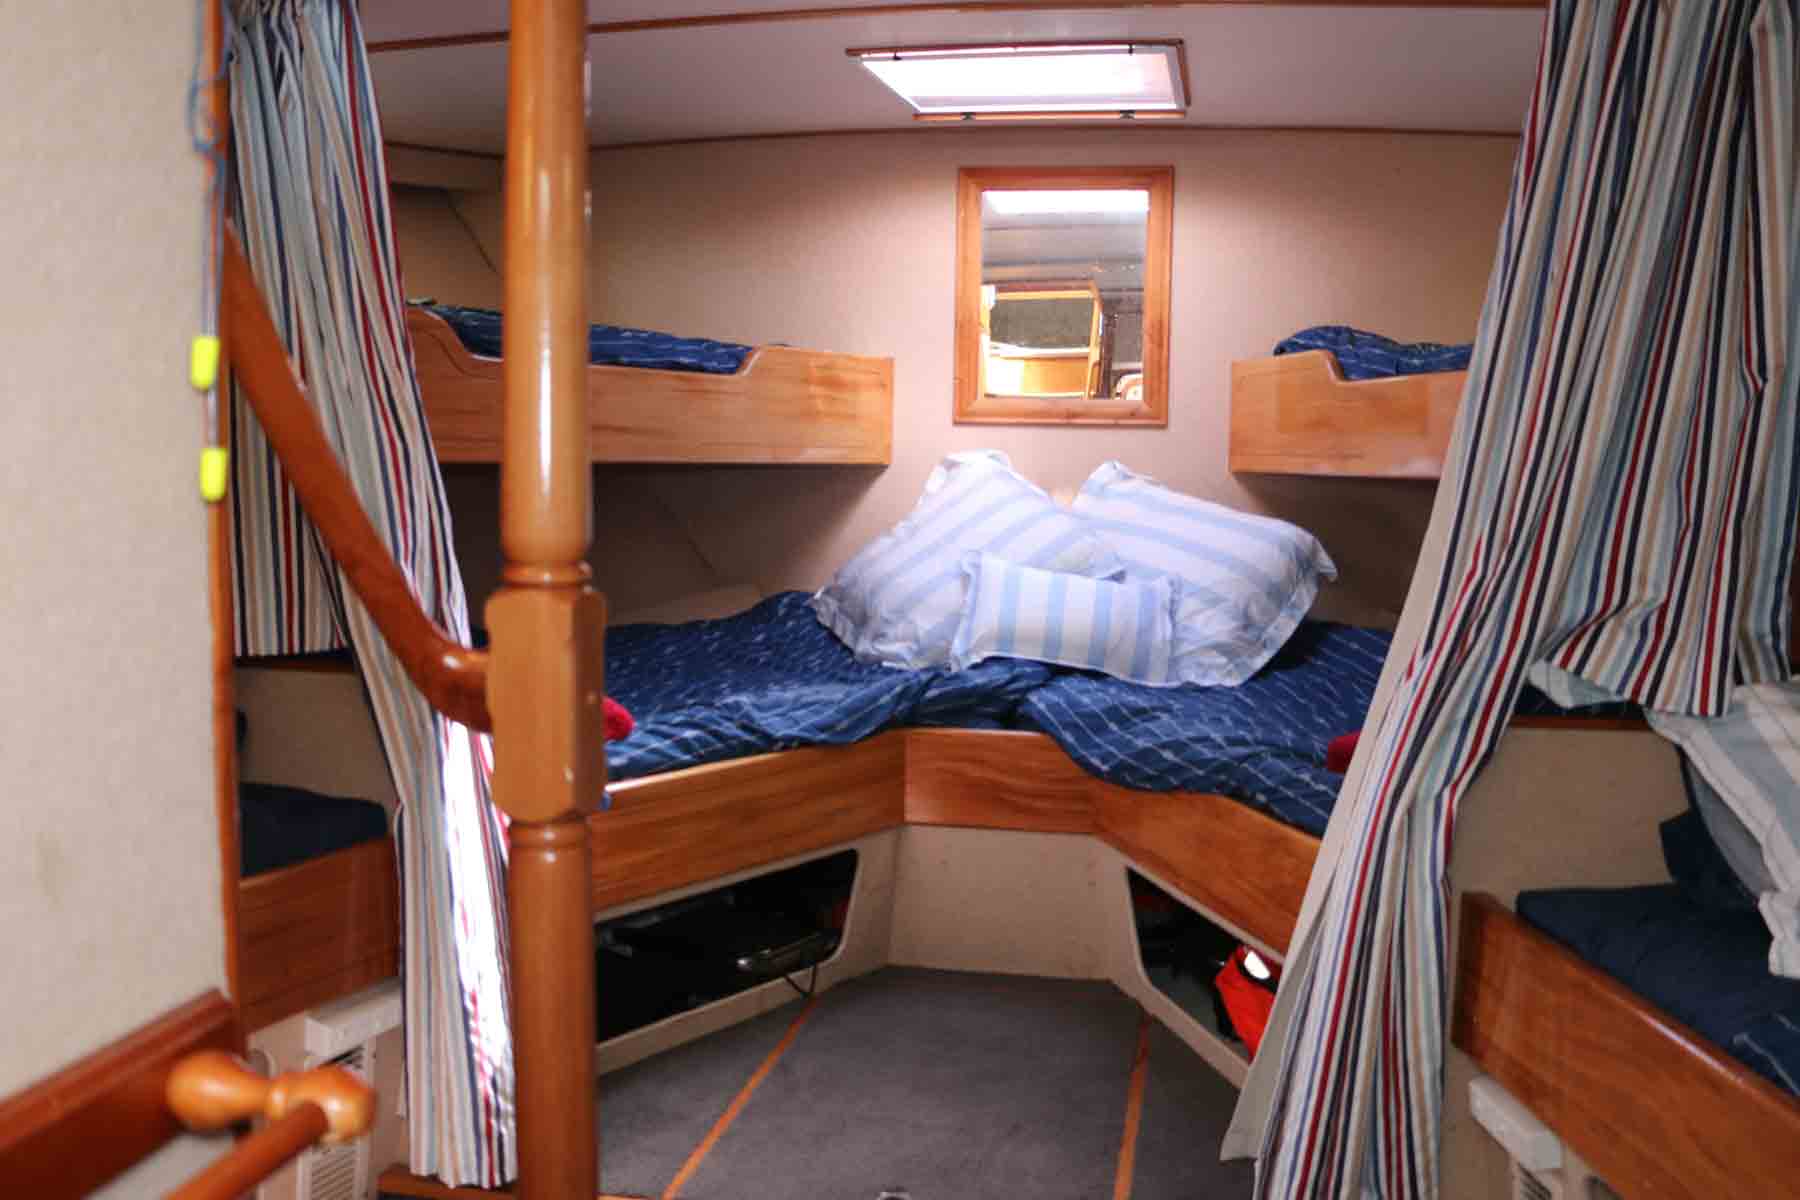 The Galileo can cater for 48 passengers, with accommodation, toilets and showers for 12